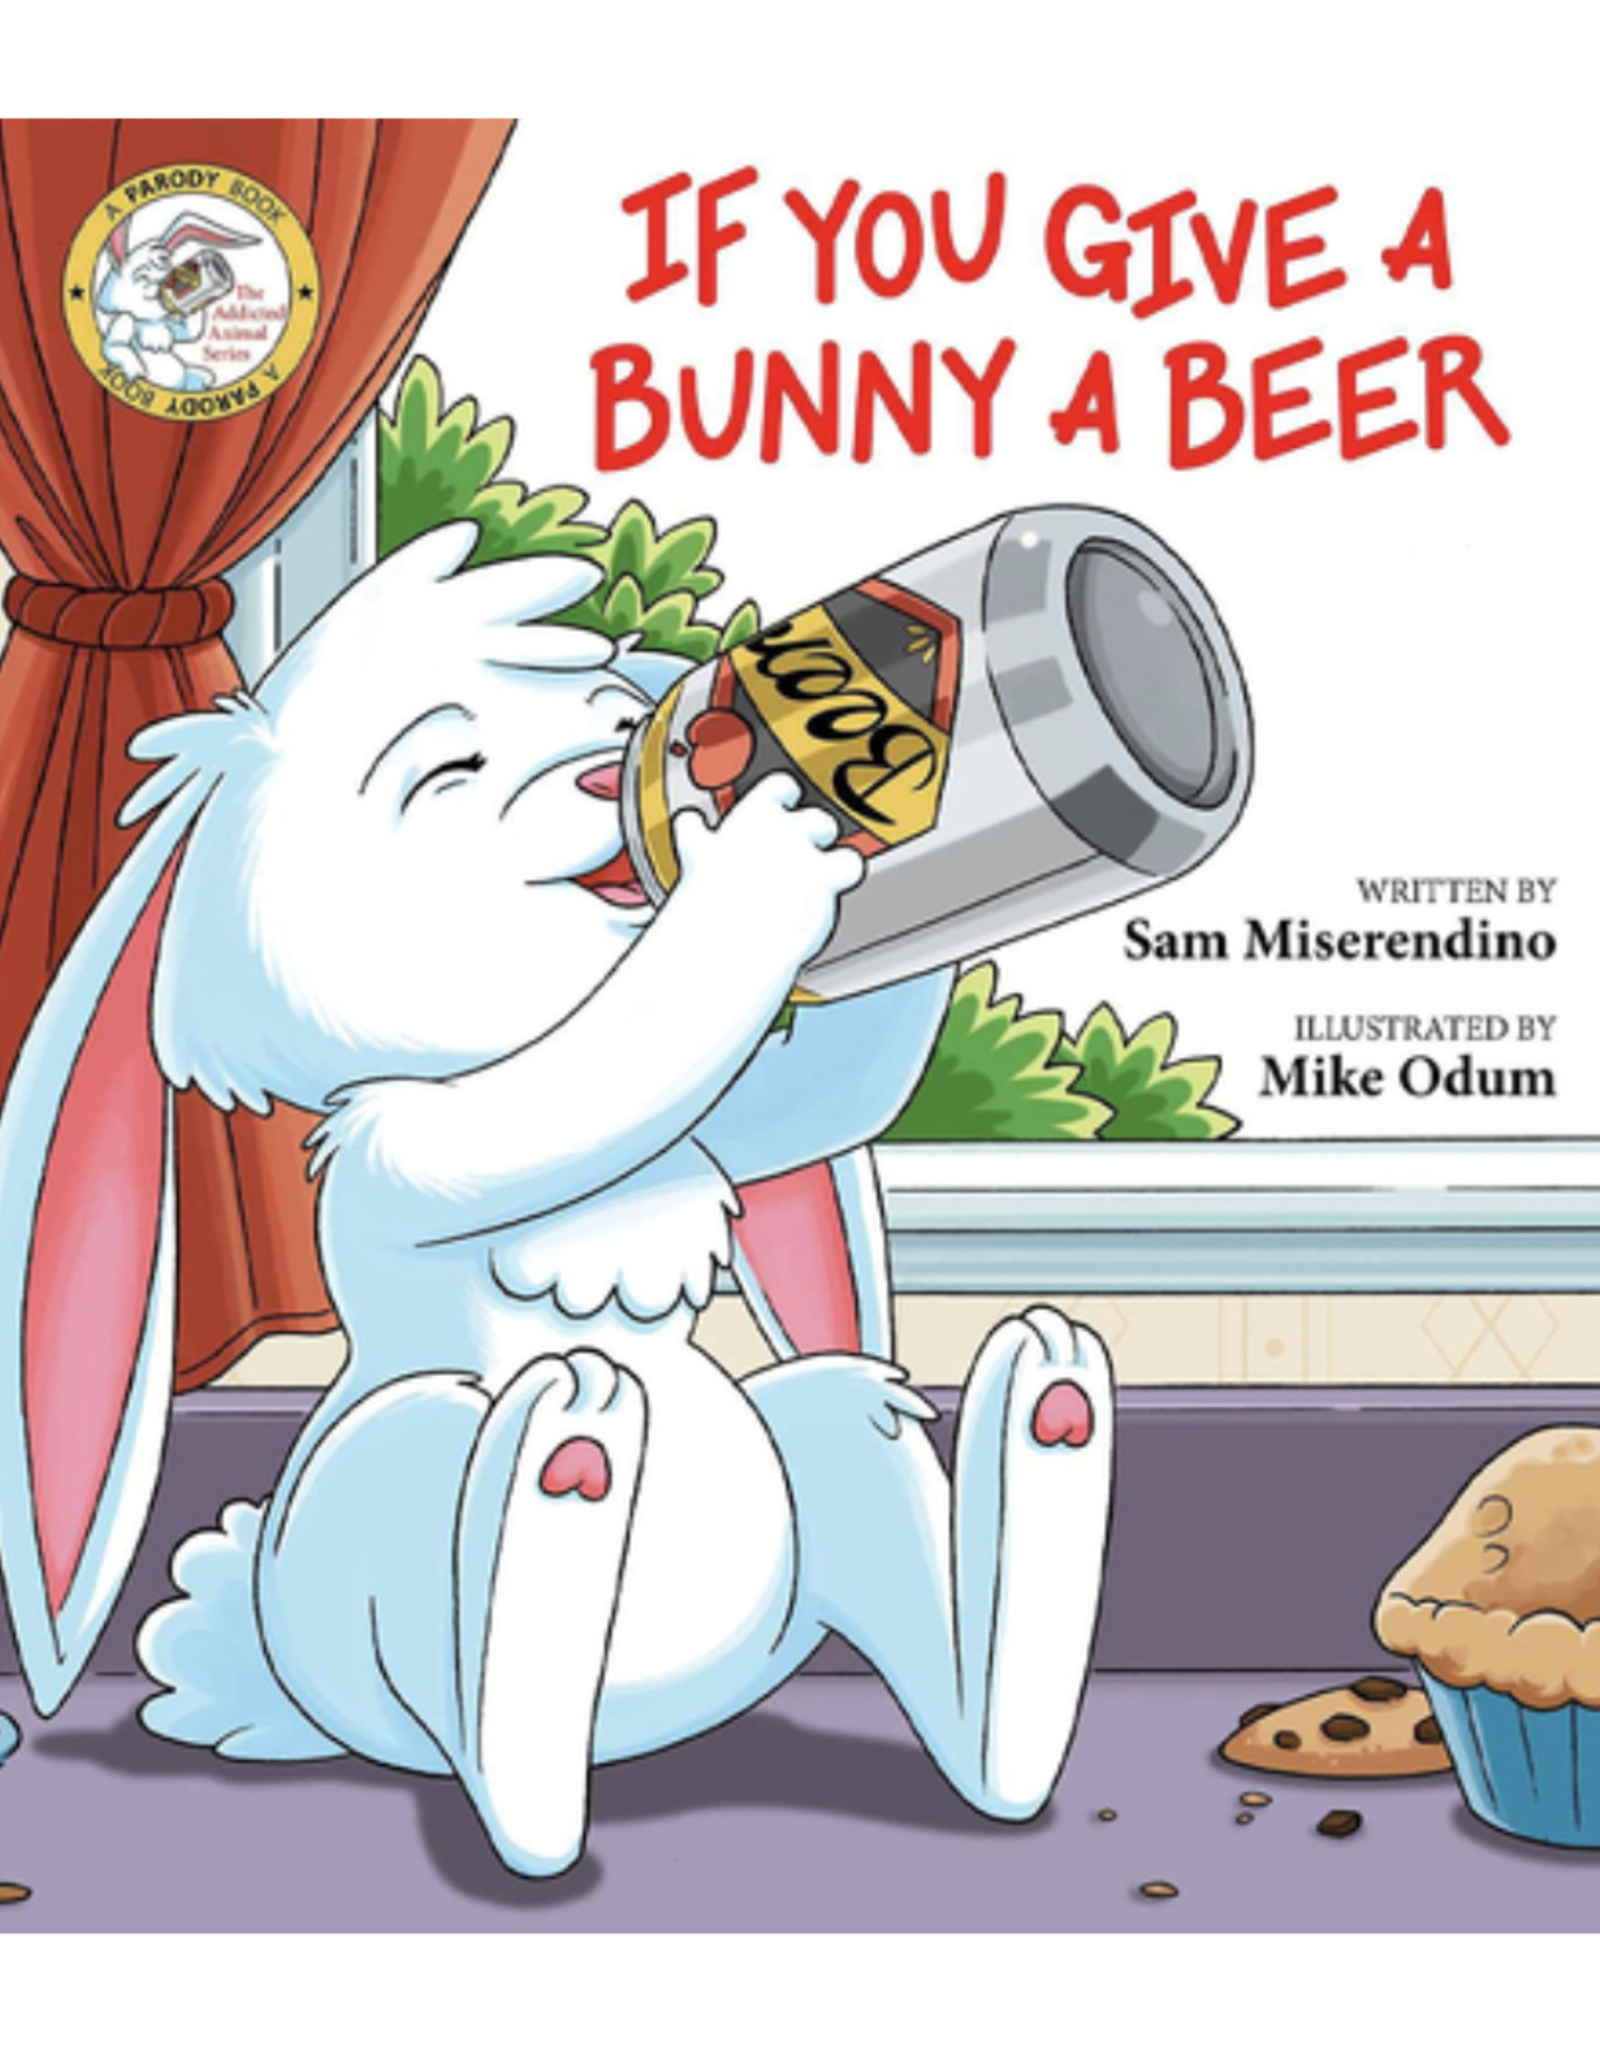 If You Give a Bunny a Beer by Sam Miserendino and Illustrated by Mike Odum